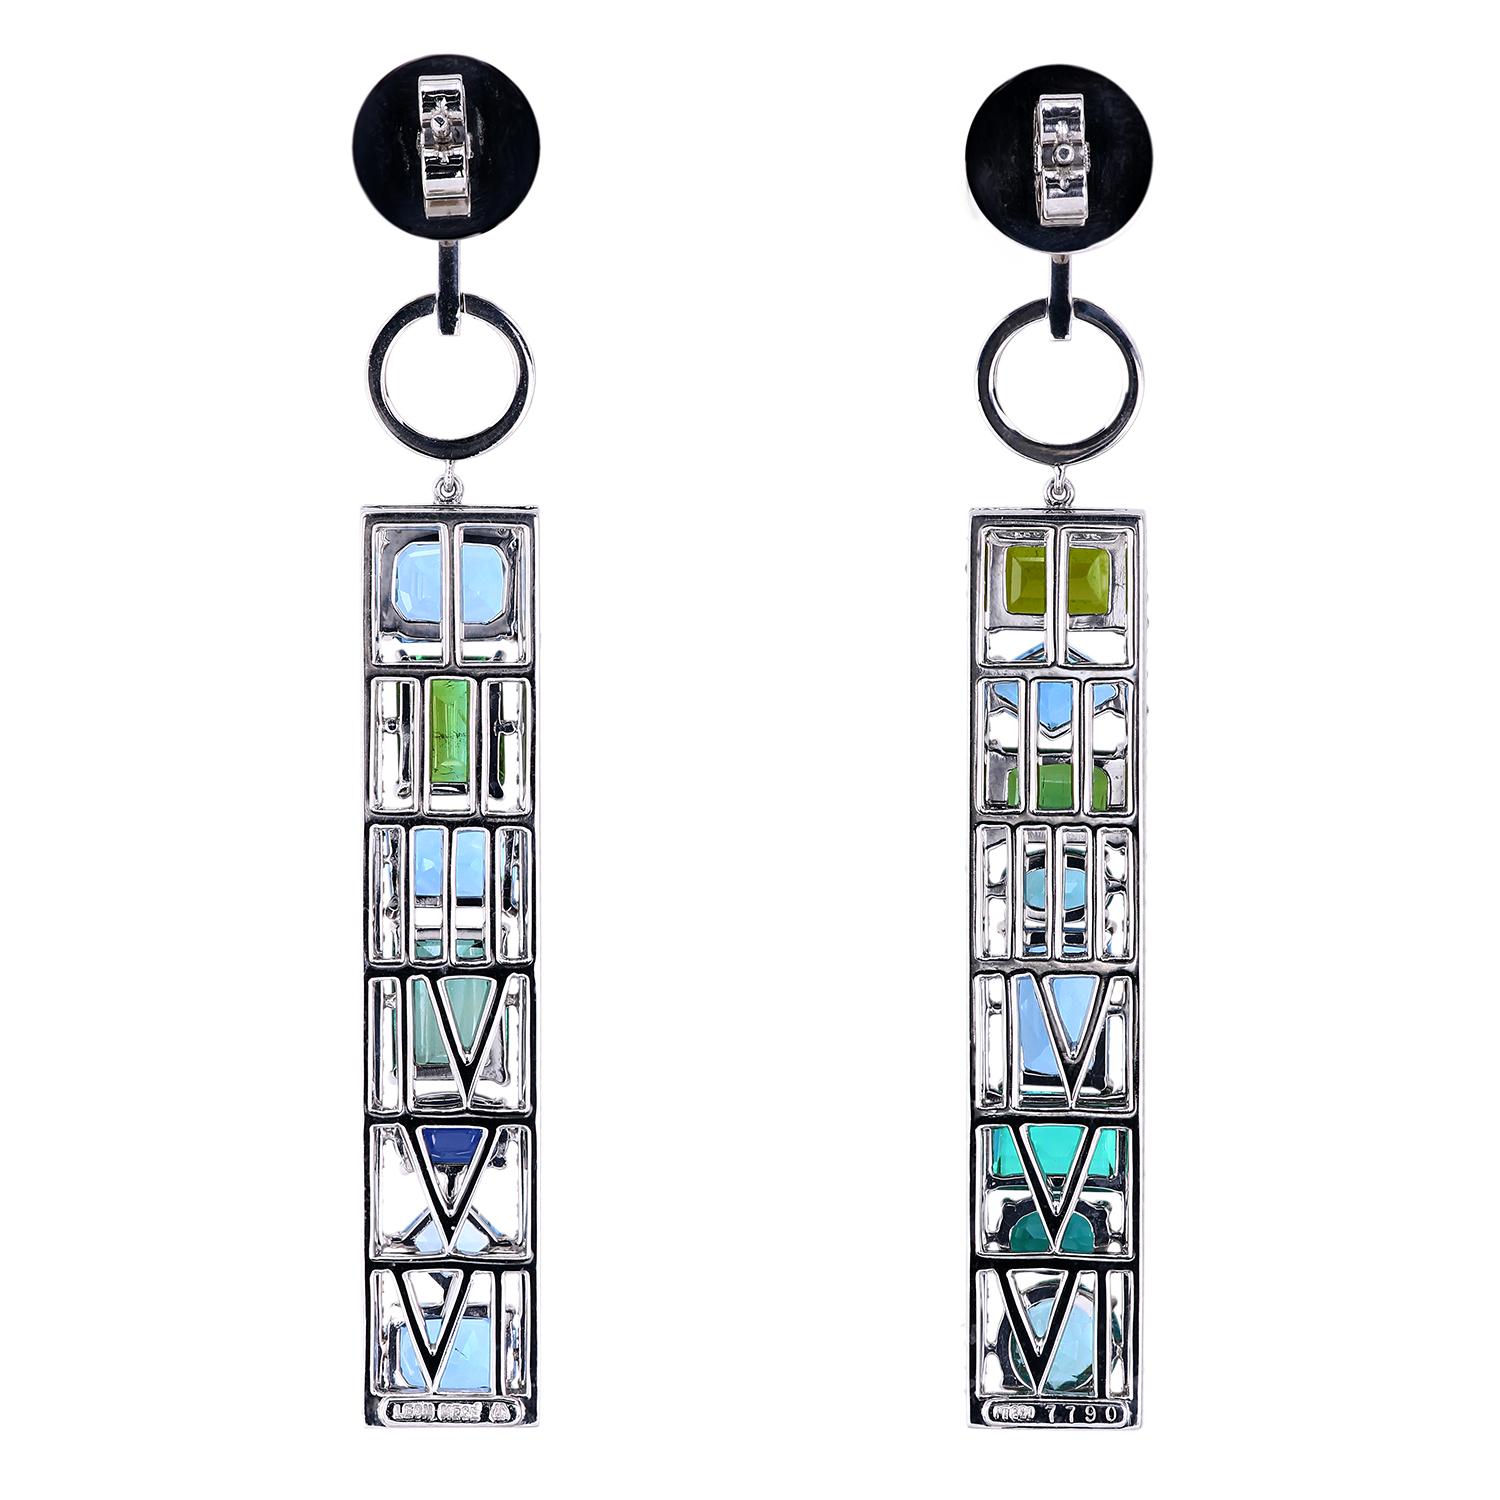 One-of-a-kind platinum earrings set with a total of 15.55 carats of natural gemstones - tourmaline, aquamarine, and sapphire.
Hinged, 10 mm post with butterfly-style self-locking pushbacks.
The frame has micro pave detail combining 222 full-cut